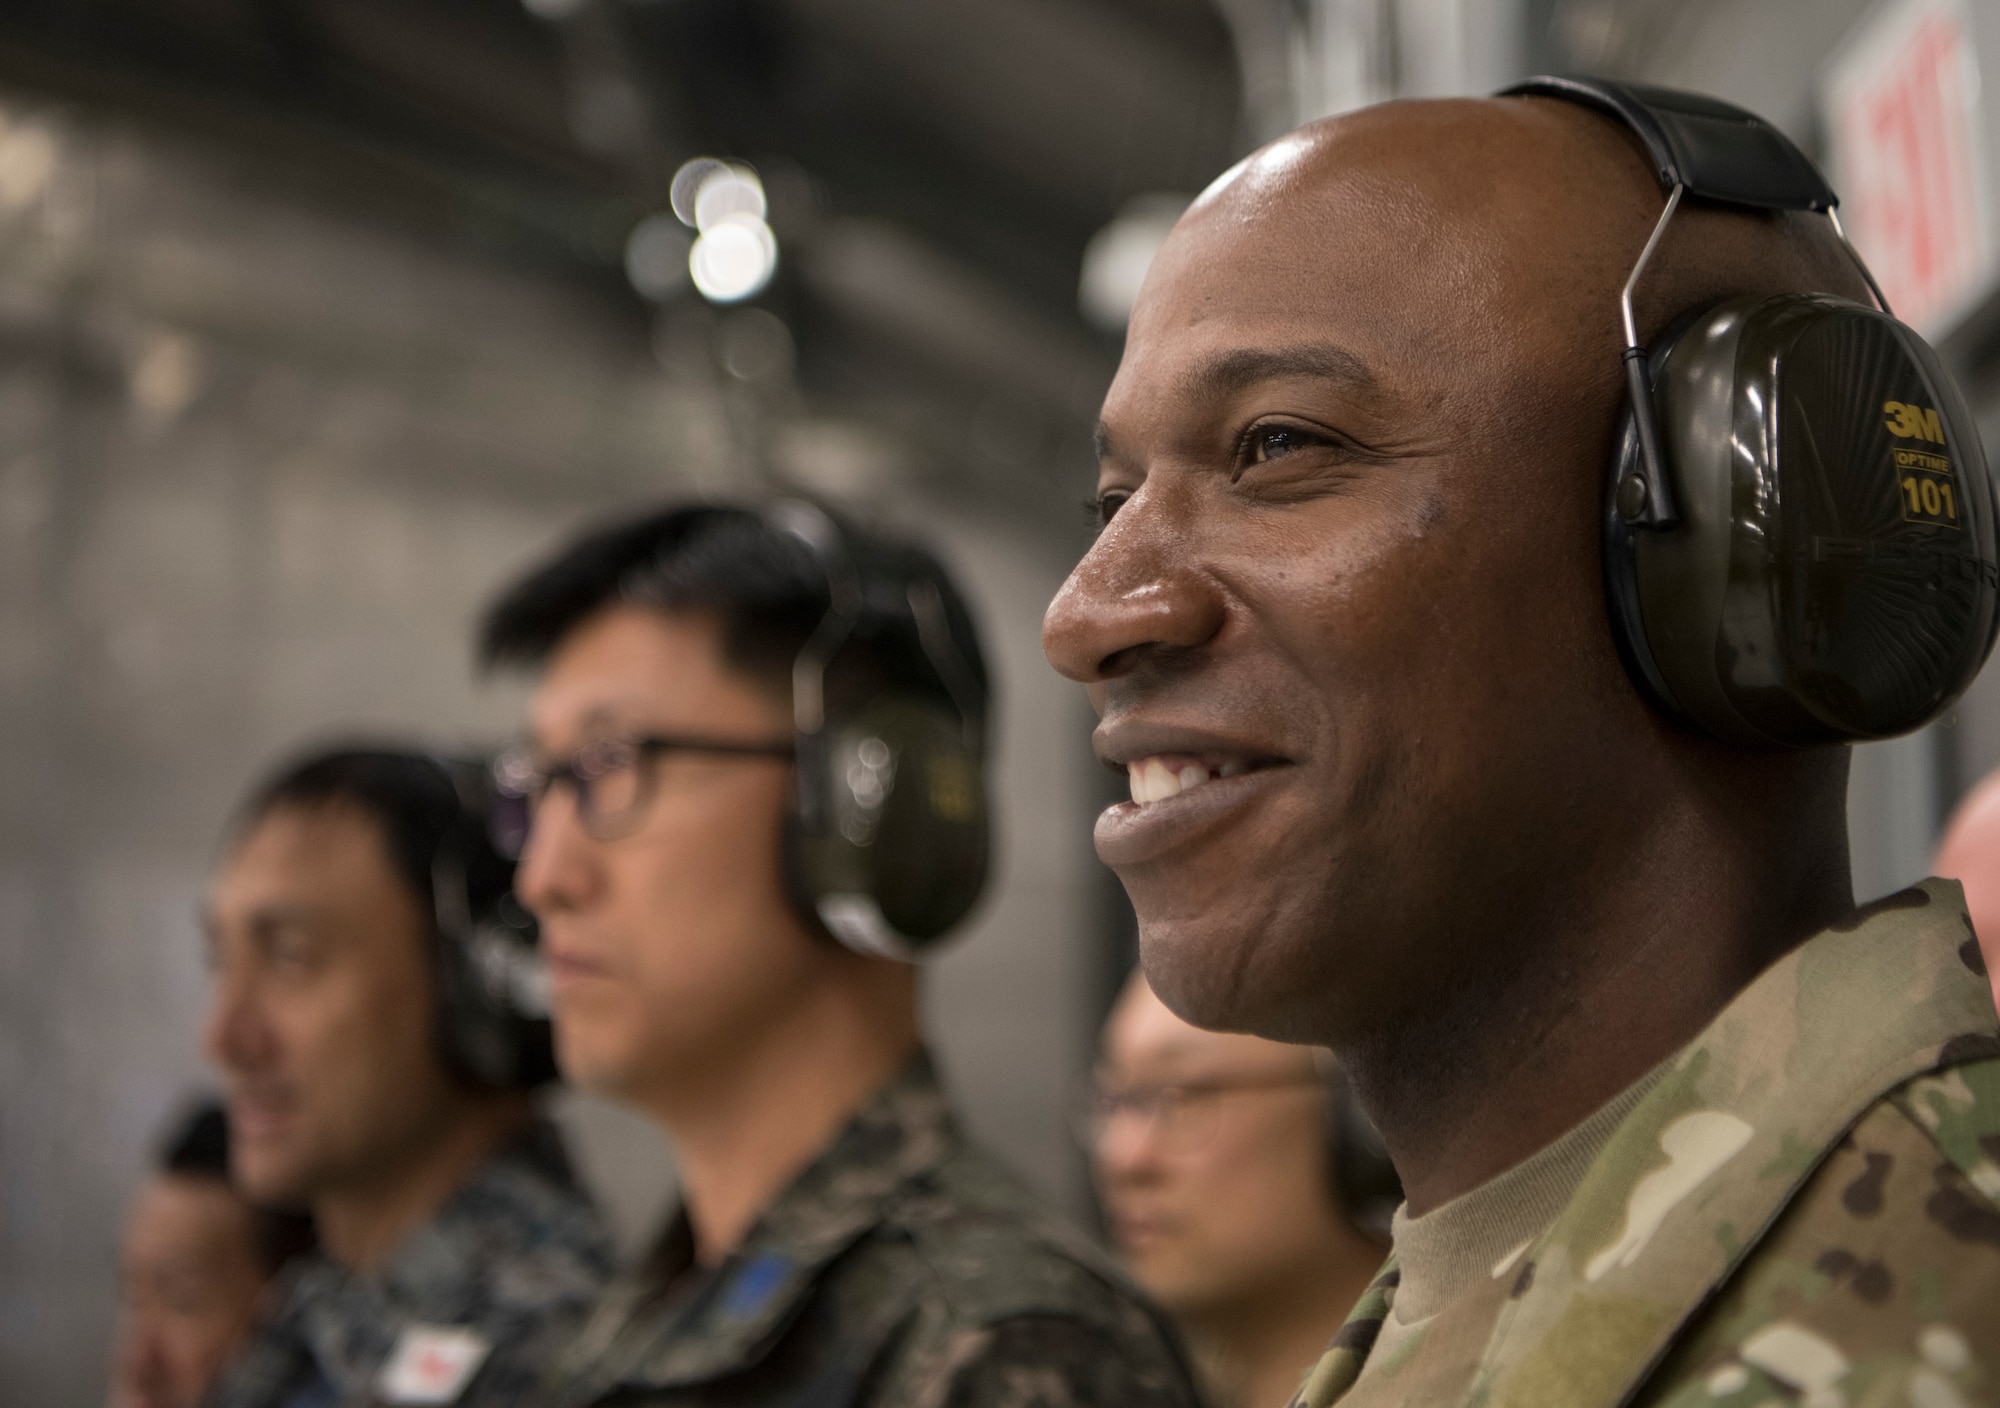 Chief Master Sergeant of the Air Force Kaleth O. Wright, chief master sergeant of the Republic of Korea, Ra Young-Chang and Joint Base Elmendorf-Richardson senior enlisted leaders watch during an F-22 jet engine test cell function check at JBER, Alaska, June 10, 2019. Chief Wright visited JBER during Red Flag-Alaska 19-2 to meet with his senior enlisted leader counterparts from throughout the Pacific. Red Flag-Alaska is a Pacific Air Forces-directed exercise that allows U.S. forces to train with coalition partners in a simulated combat environment.